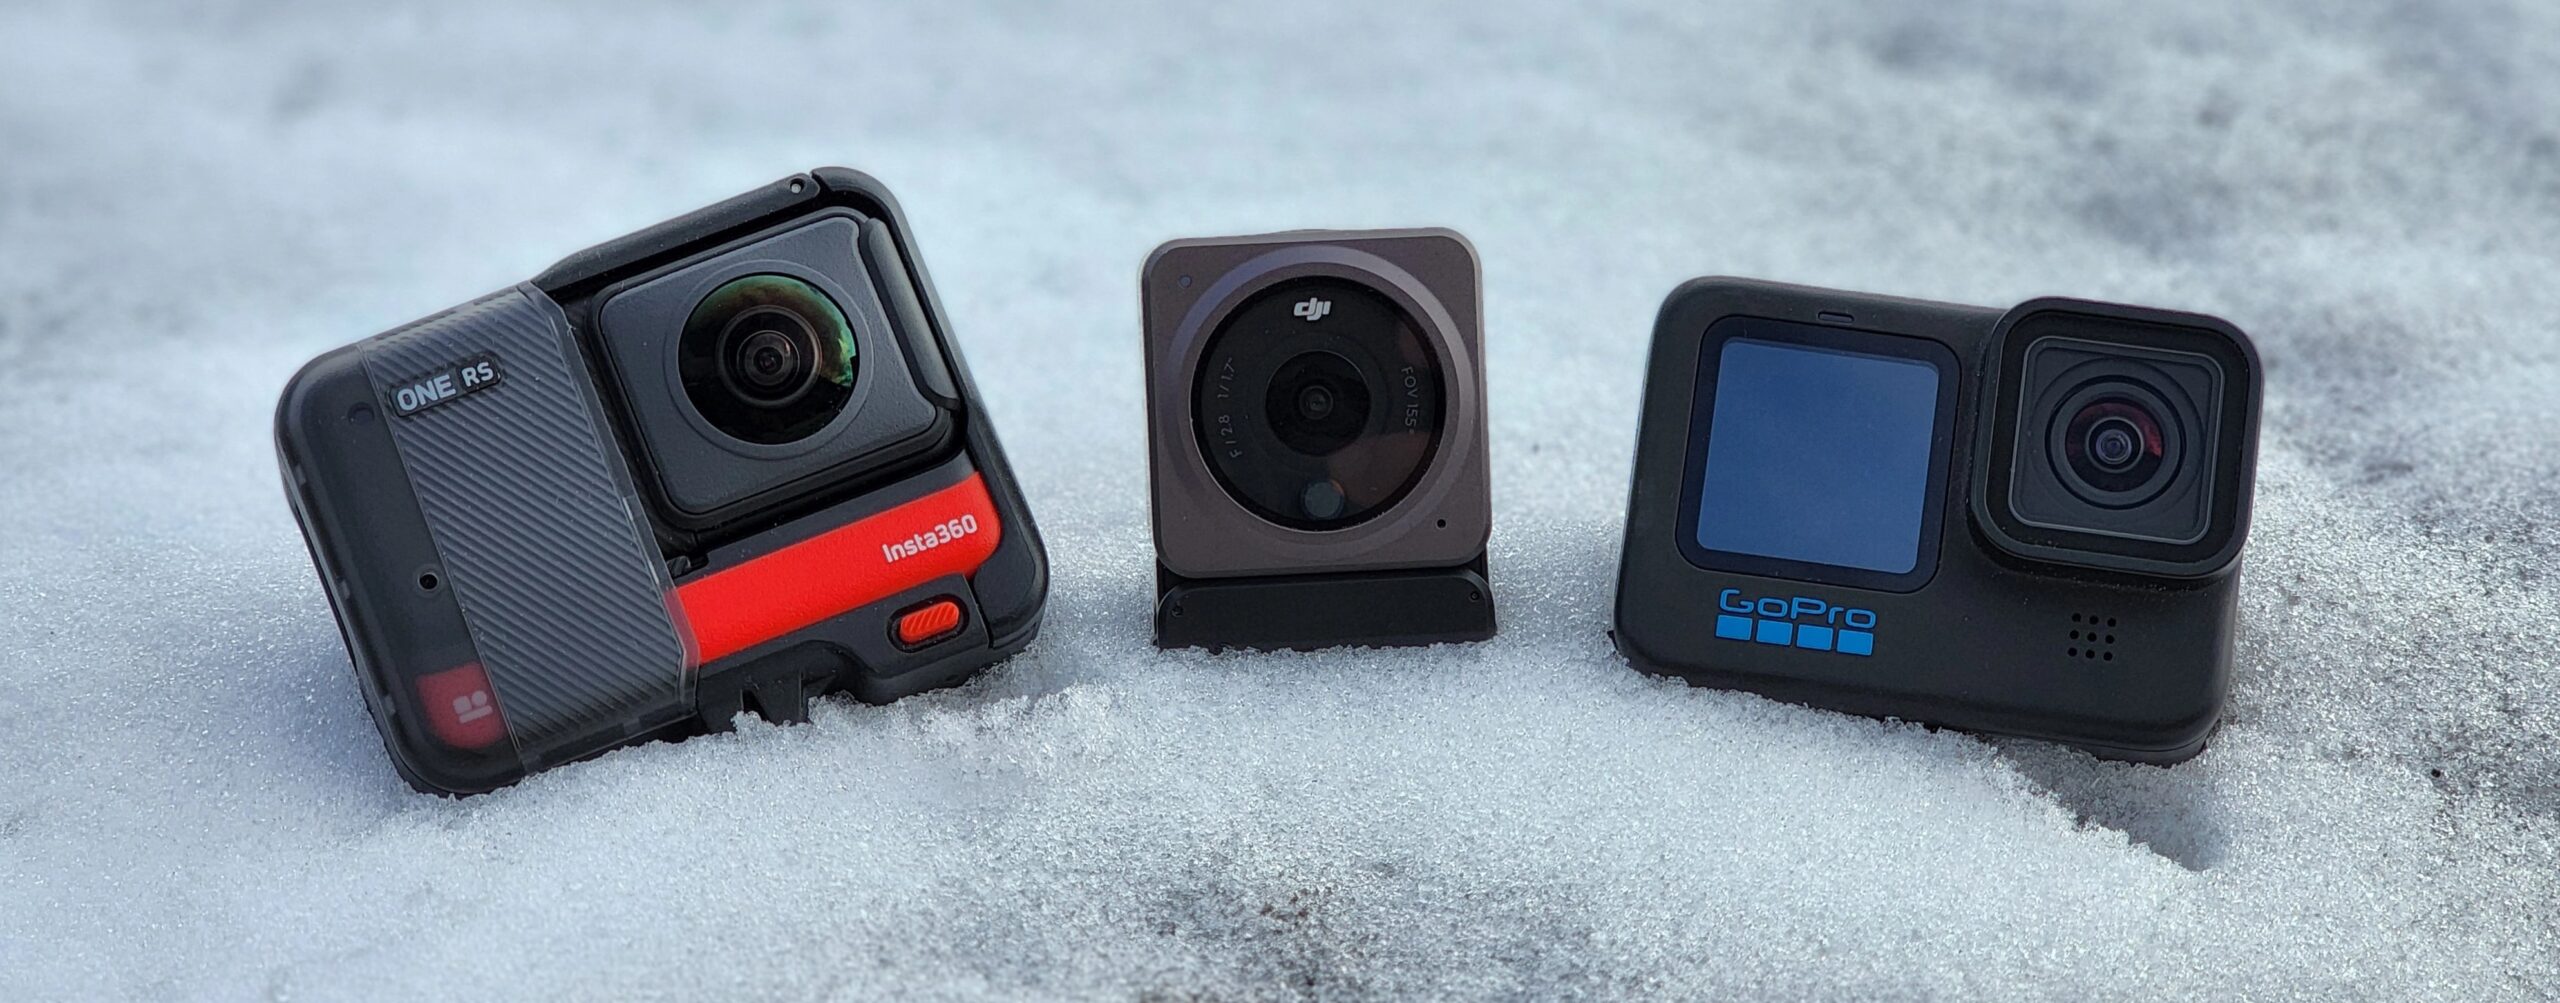 Best Action Camera for Your Blog or YouTube Channel GoPro DJI Action Camera Insta360